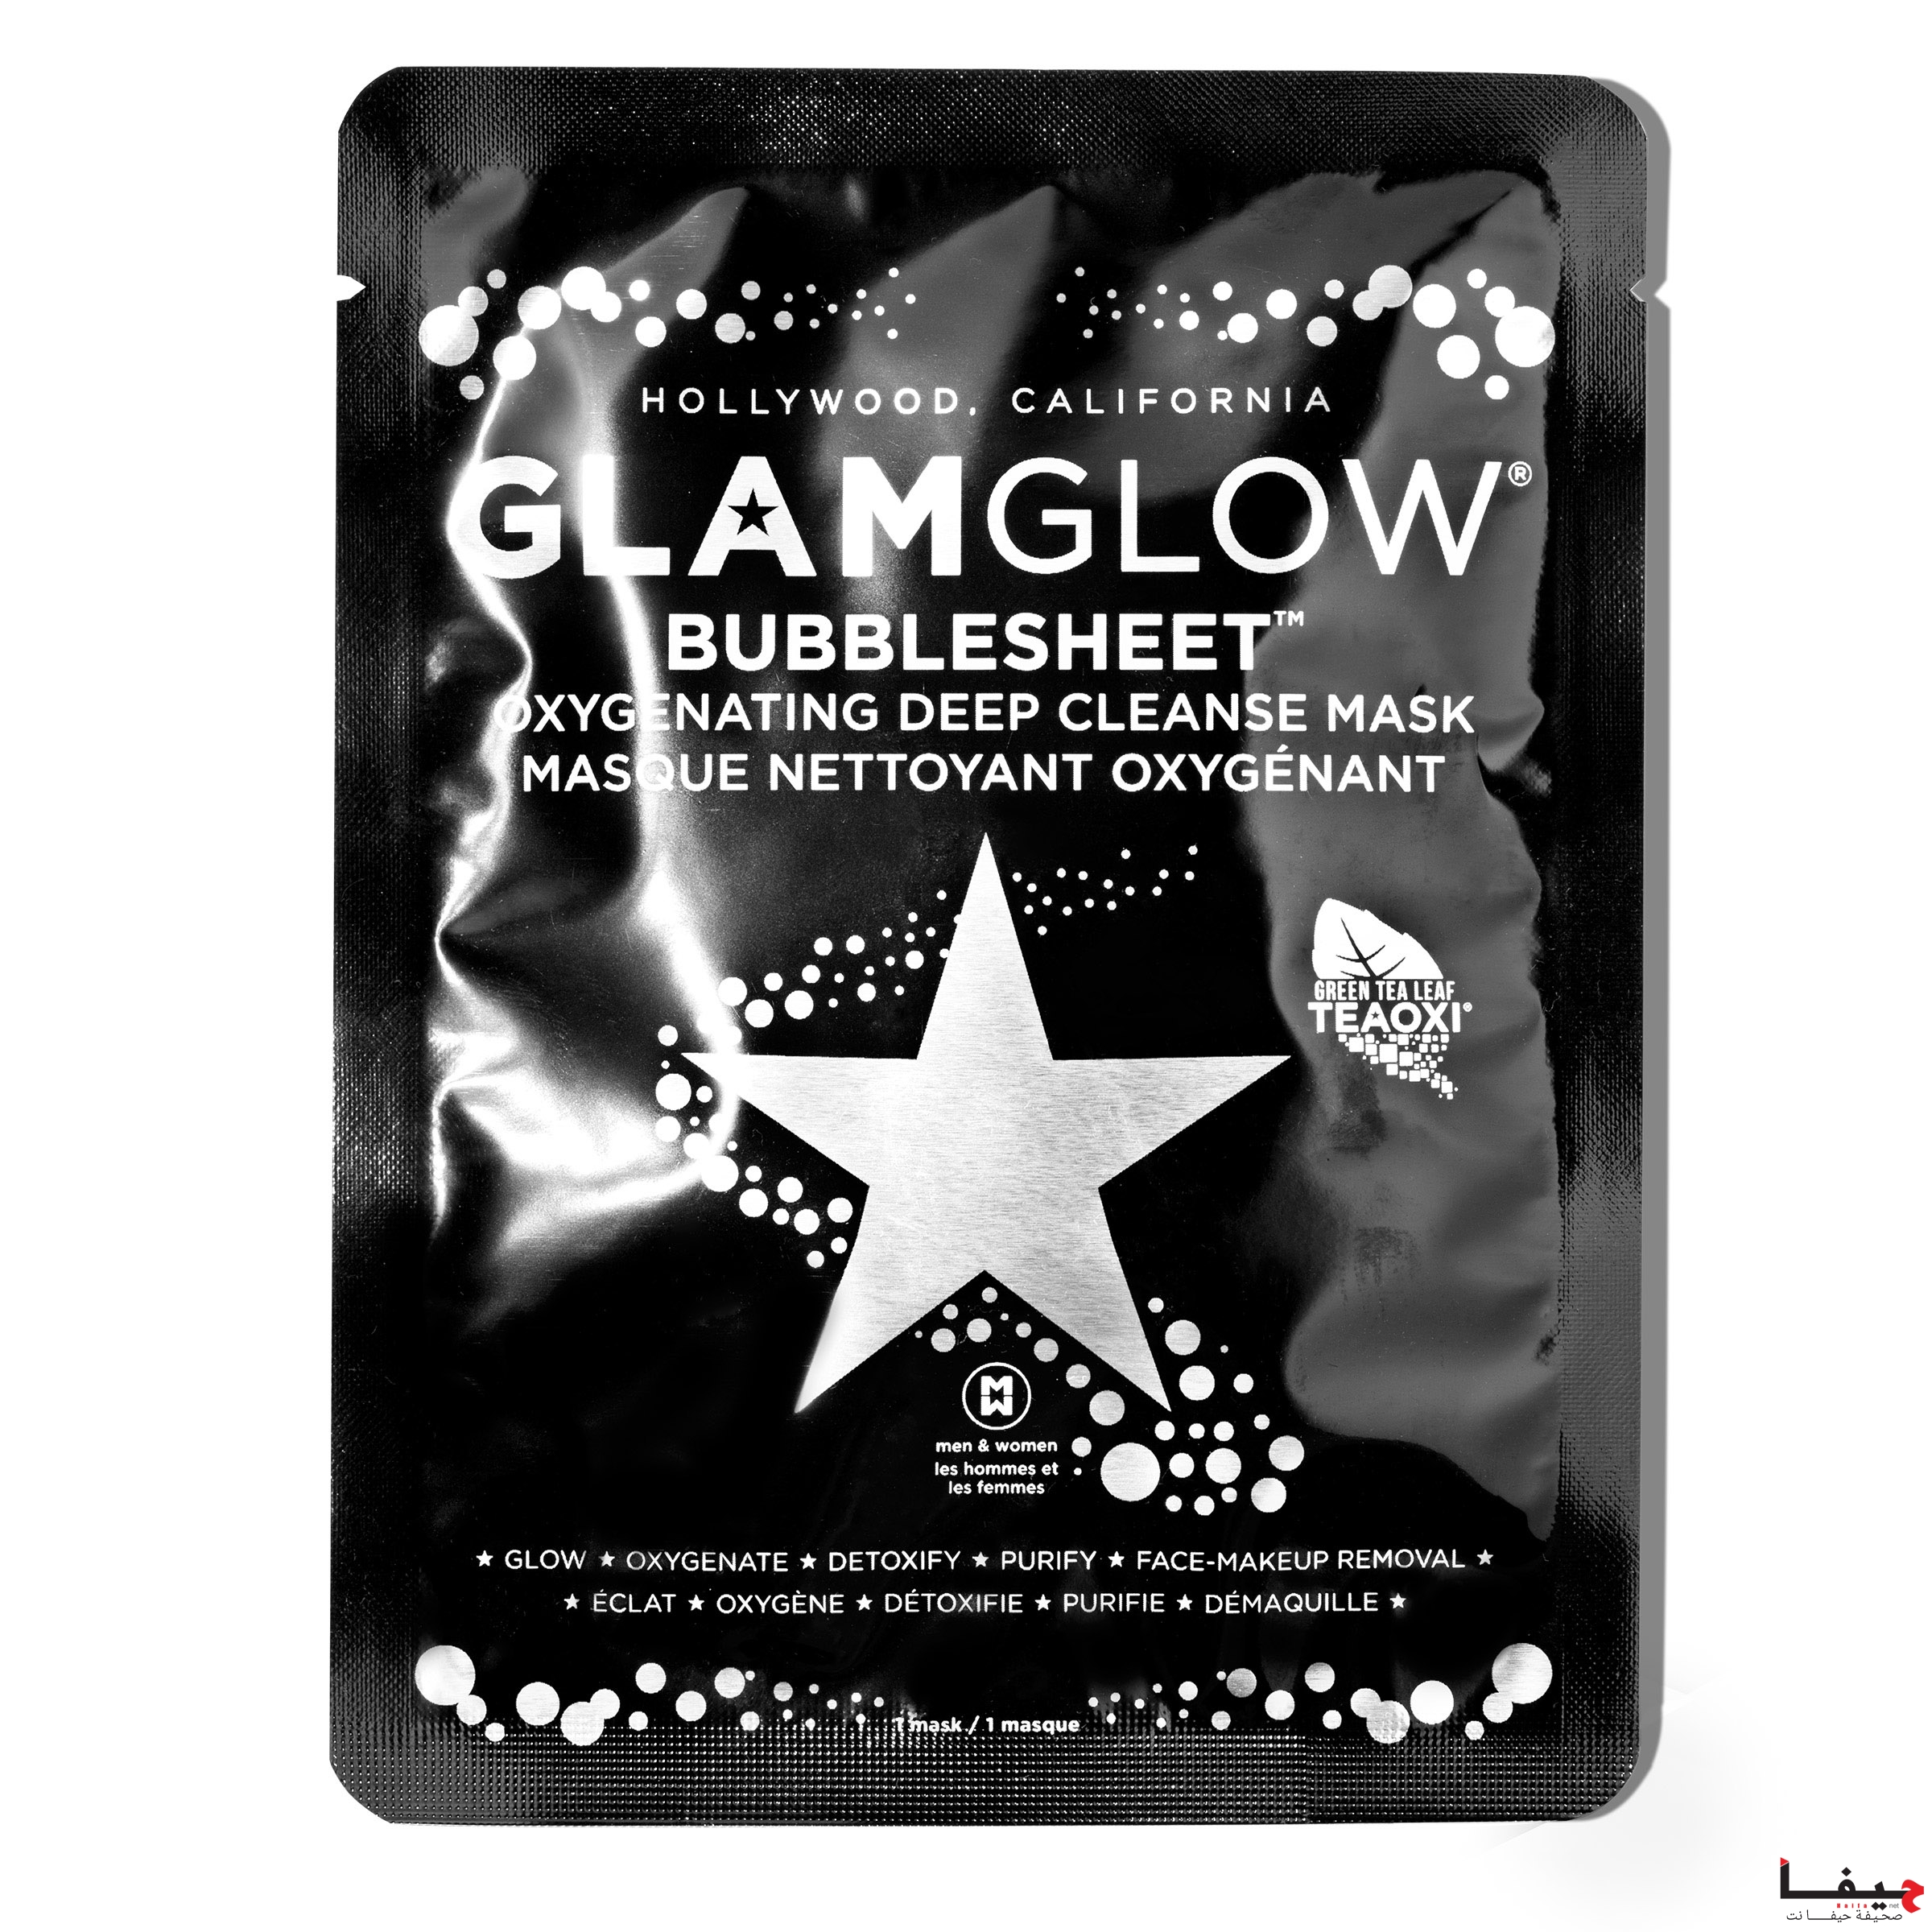 GLAMGLOW تُطلق BUBBLE SHEET TM Oxygenating Deep Cleanse Mask